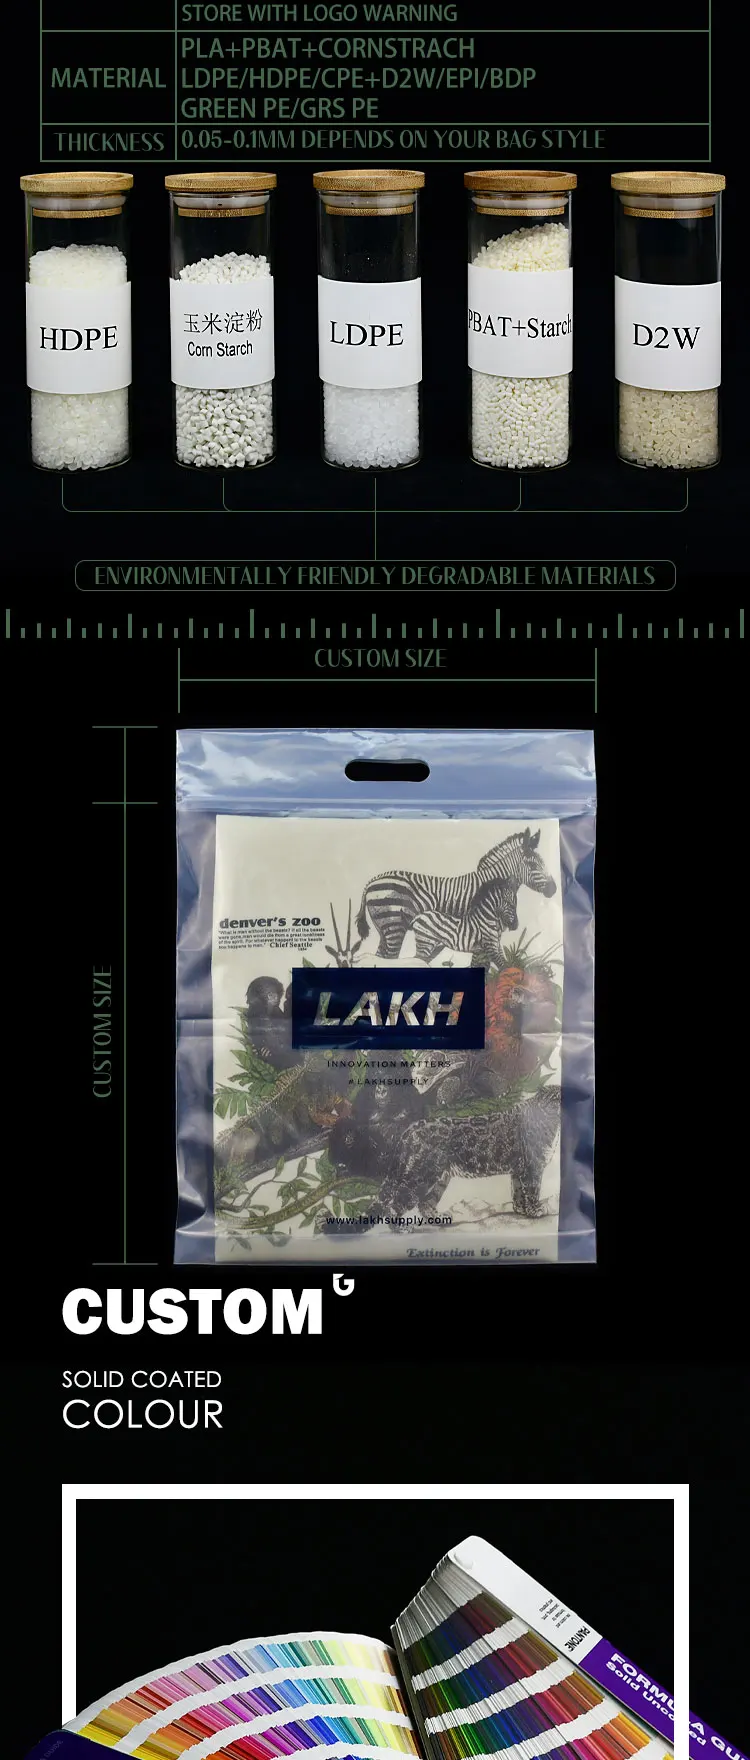 Plastic size custom logo packaging bags with handle clear transparent bag zip biodegradable ldpe material details